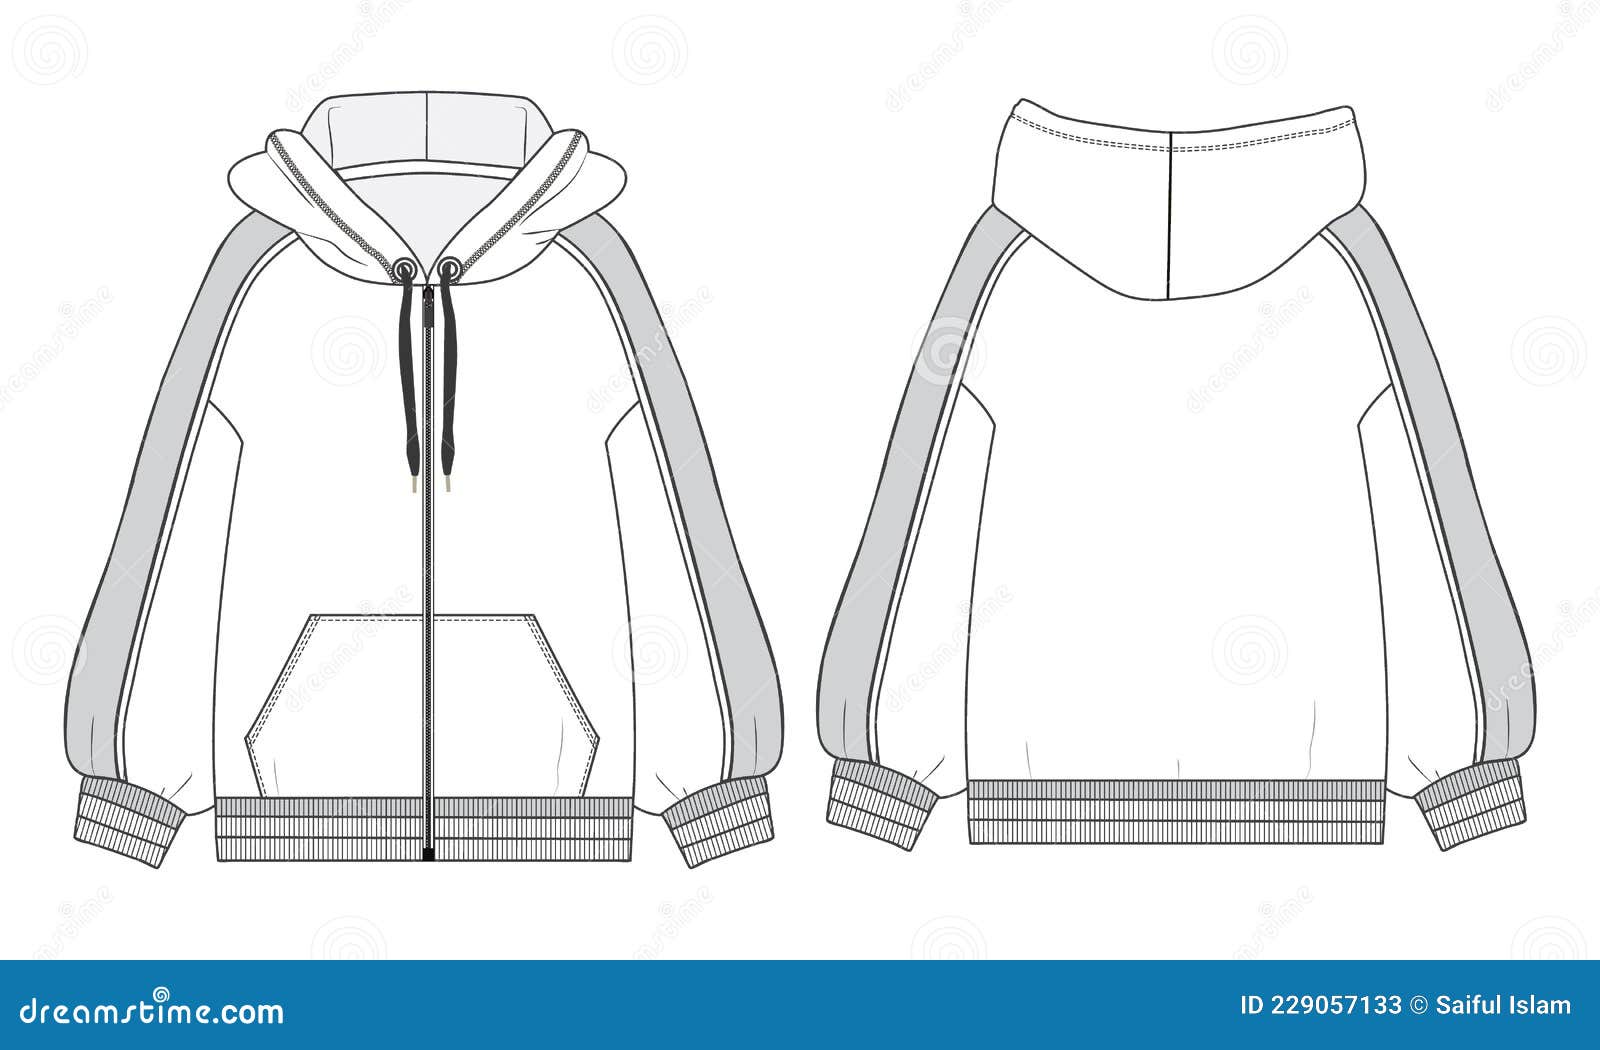 Pin on Fashion Clothing Flat sketches drawing templates